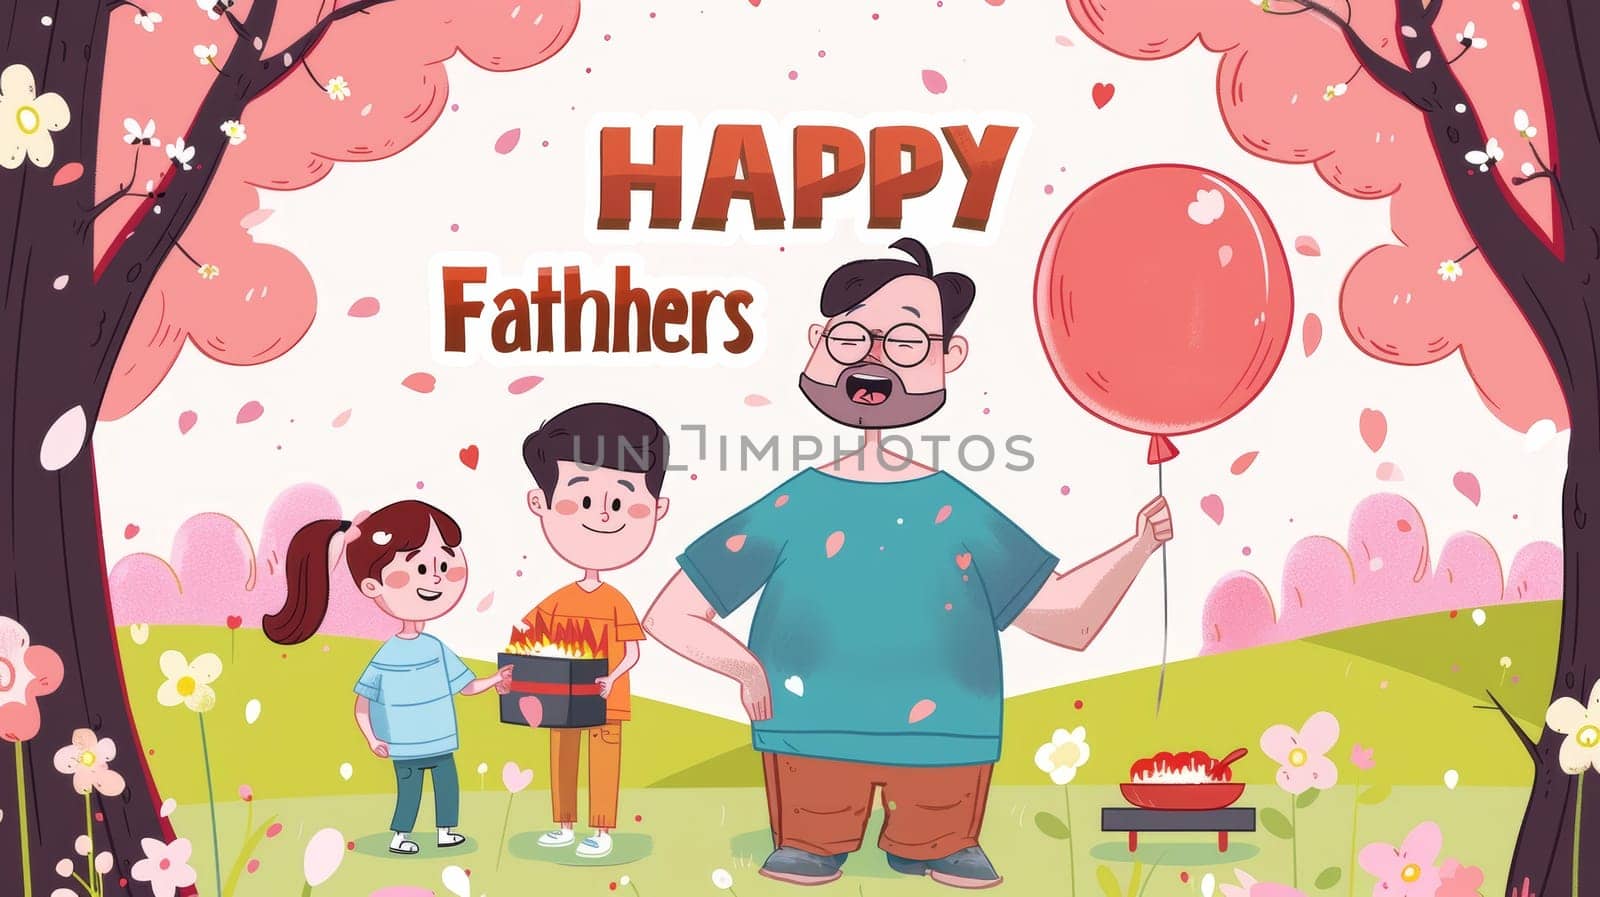 An animated image of a joyful father with two kids, holding a balloon and a cake, celebrating Fathers Day outdoors with pink blossoms around